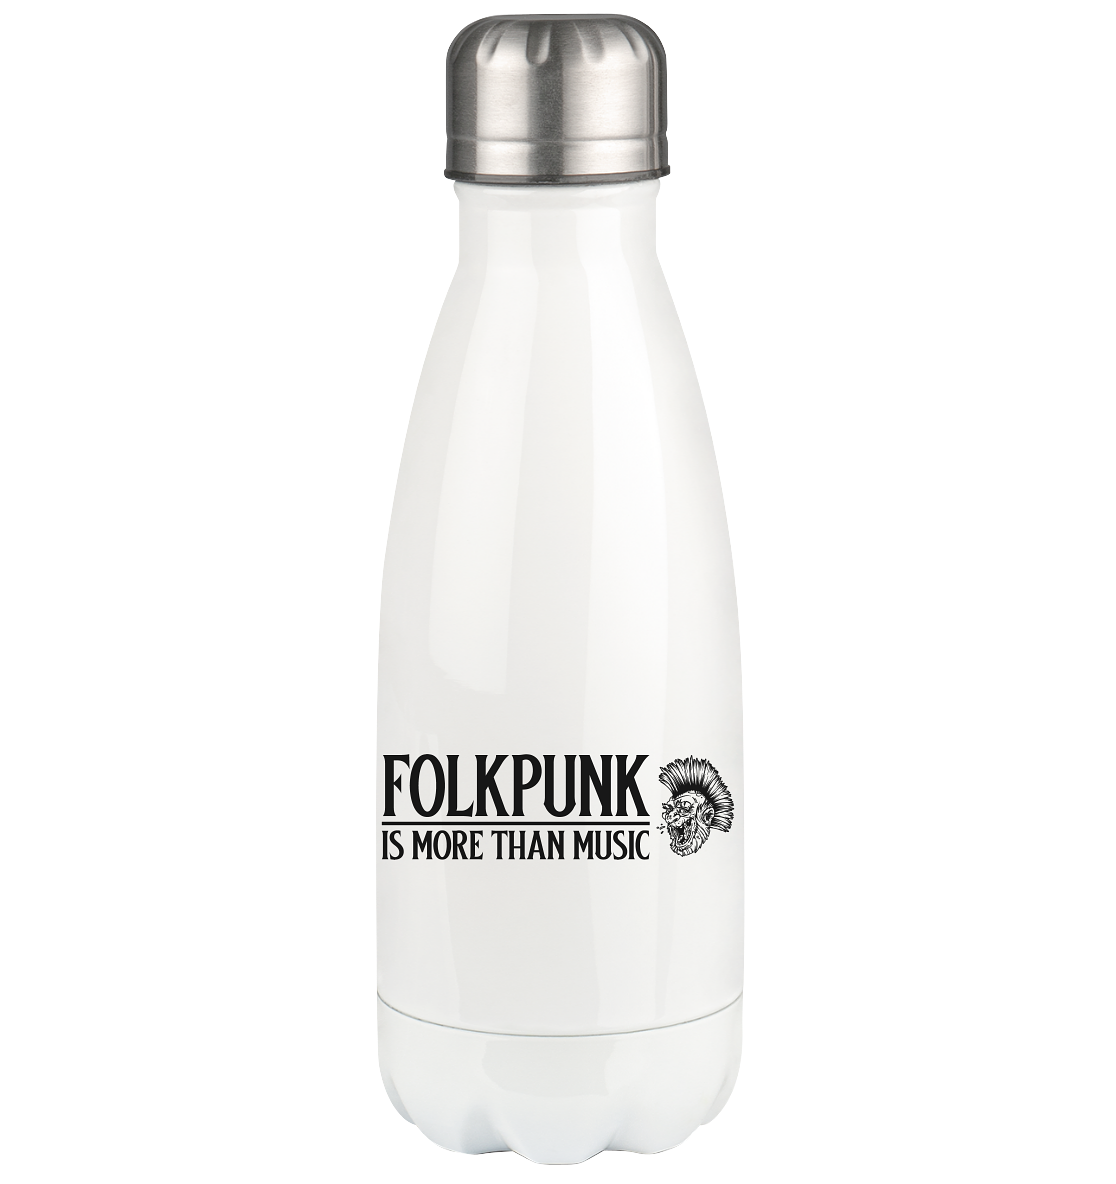 Folkpunk "Is More Than Music" - Thermoflasche 350ml